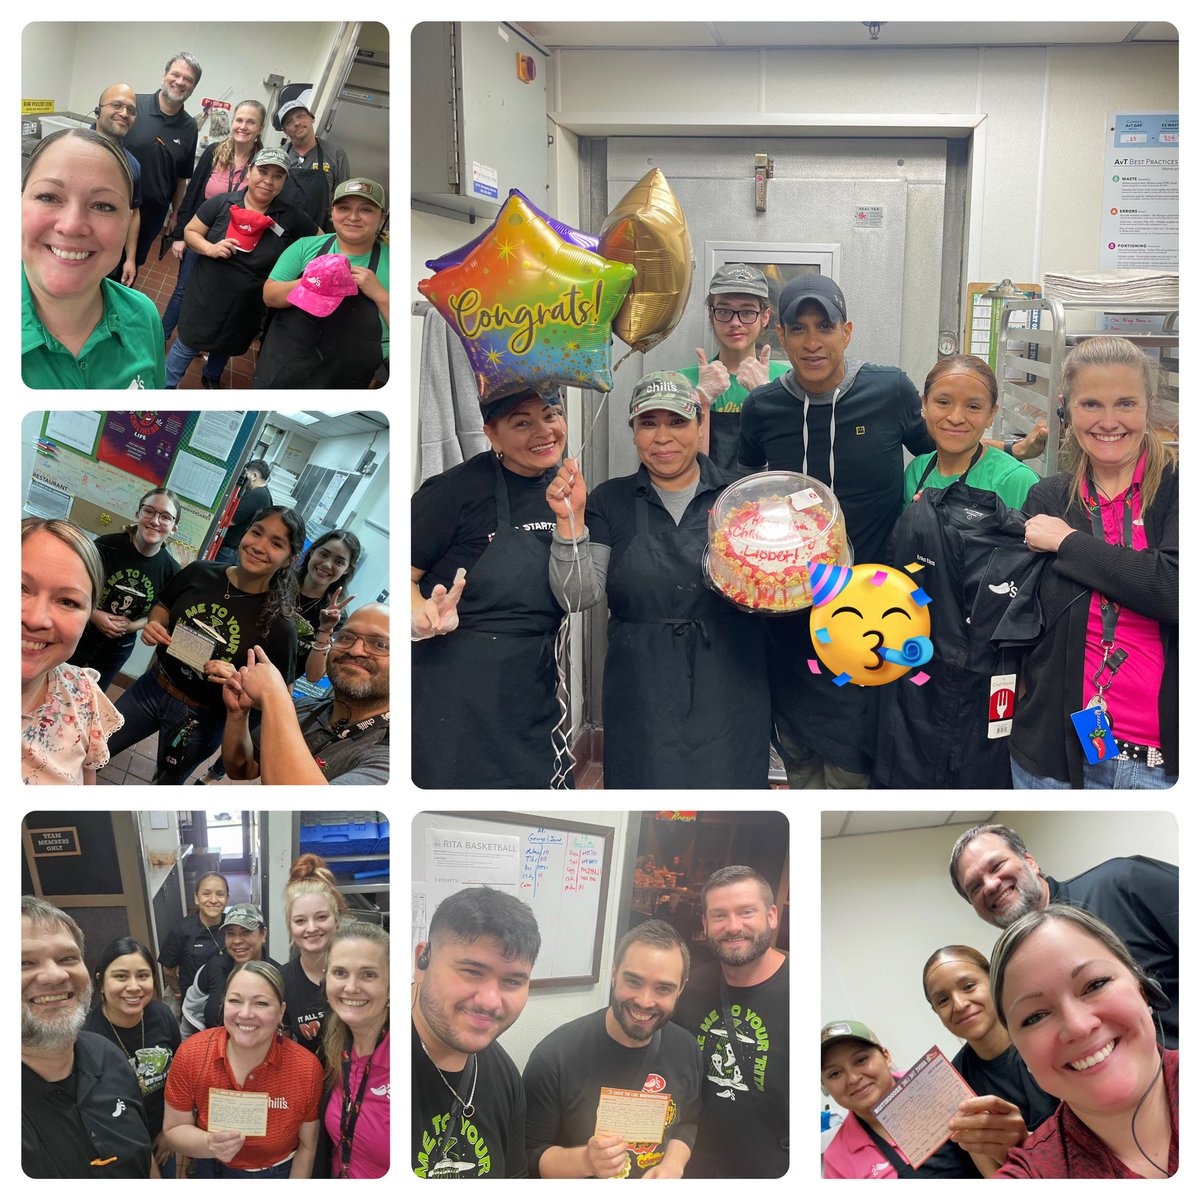 #Latepost For the last 6 weeks I have had the privilege to help support #ChilisCleburne! #Eclipse2024 was magical 🌝🌗🌑! We’ve shared ATL parties, bdays, anniversaries, focused recognition around big swings, alignment on positive principled accountability, & fun! #ChilisLove